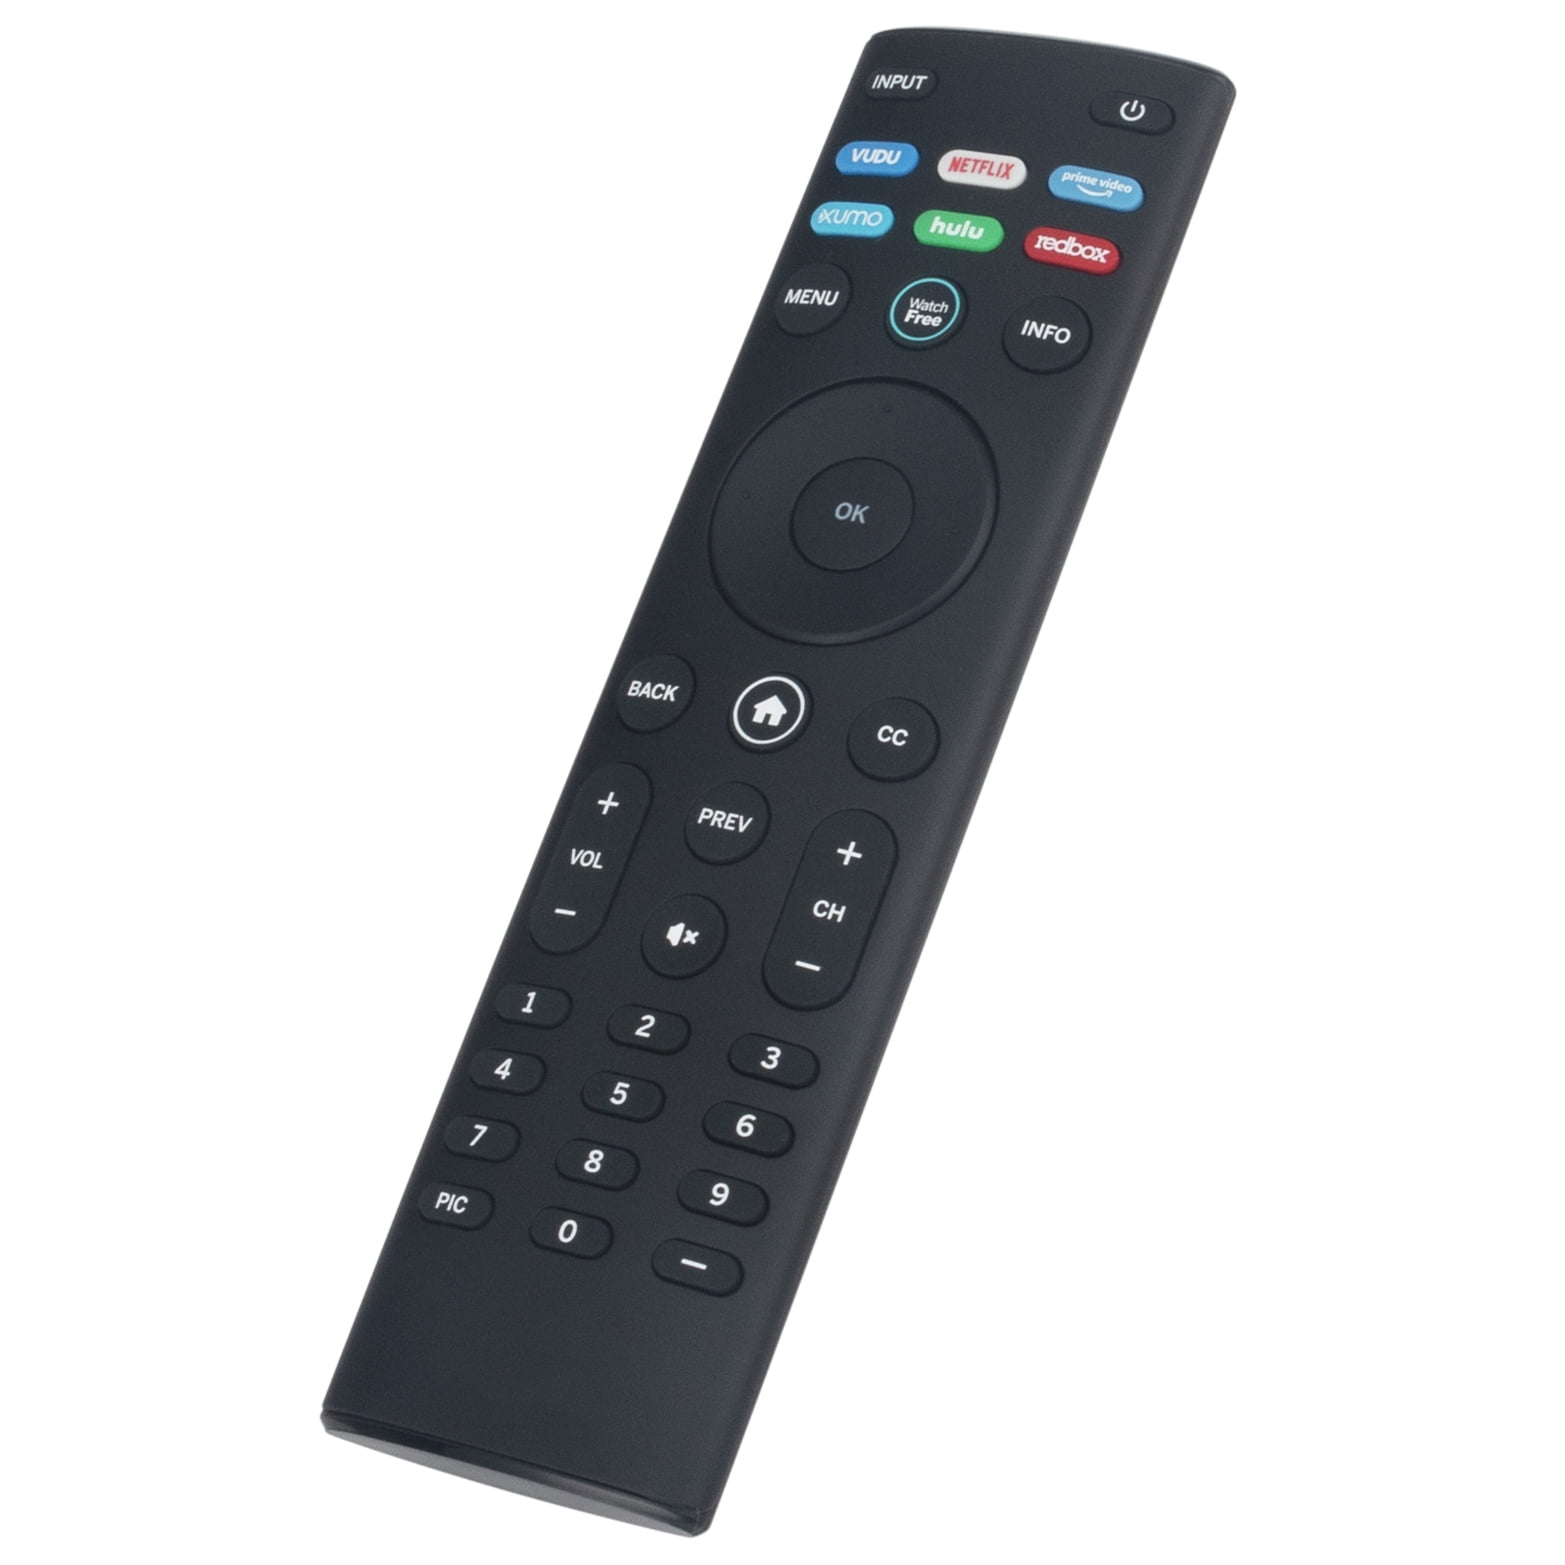 XRT140 New IR Remote for Vizio 4K HDR Smart TV OLED55-H1 OLED65-H1 ...